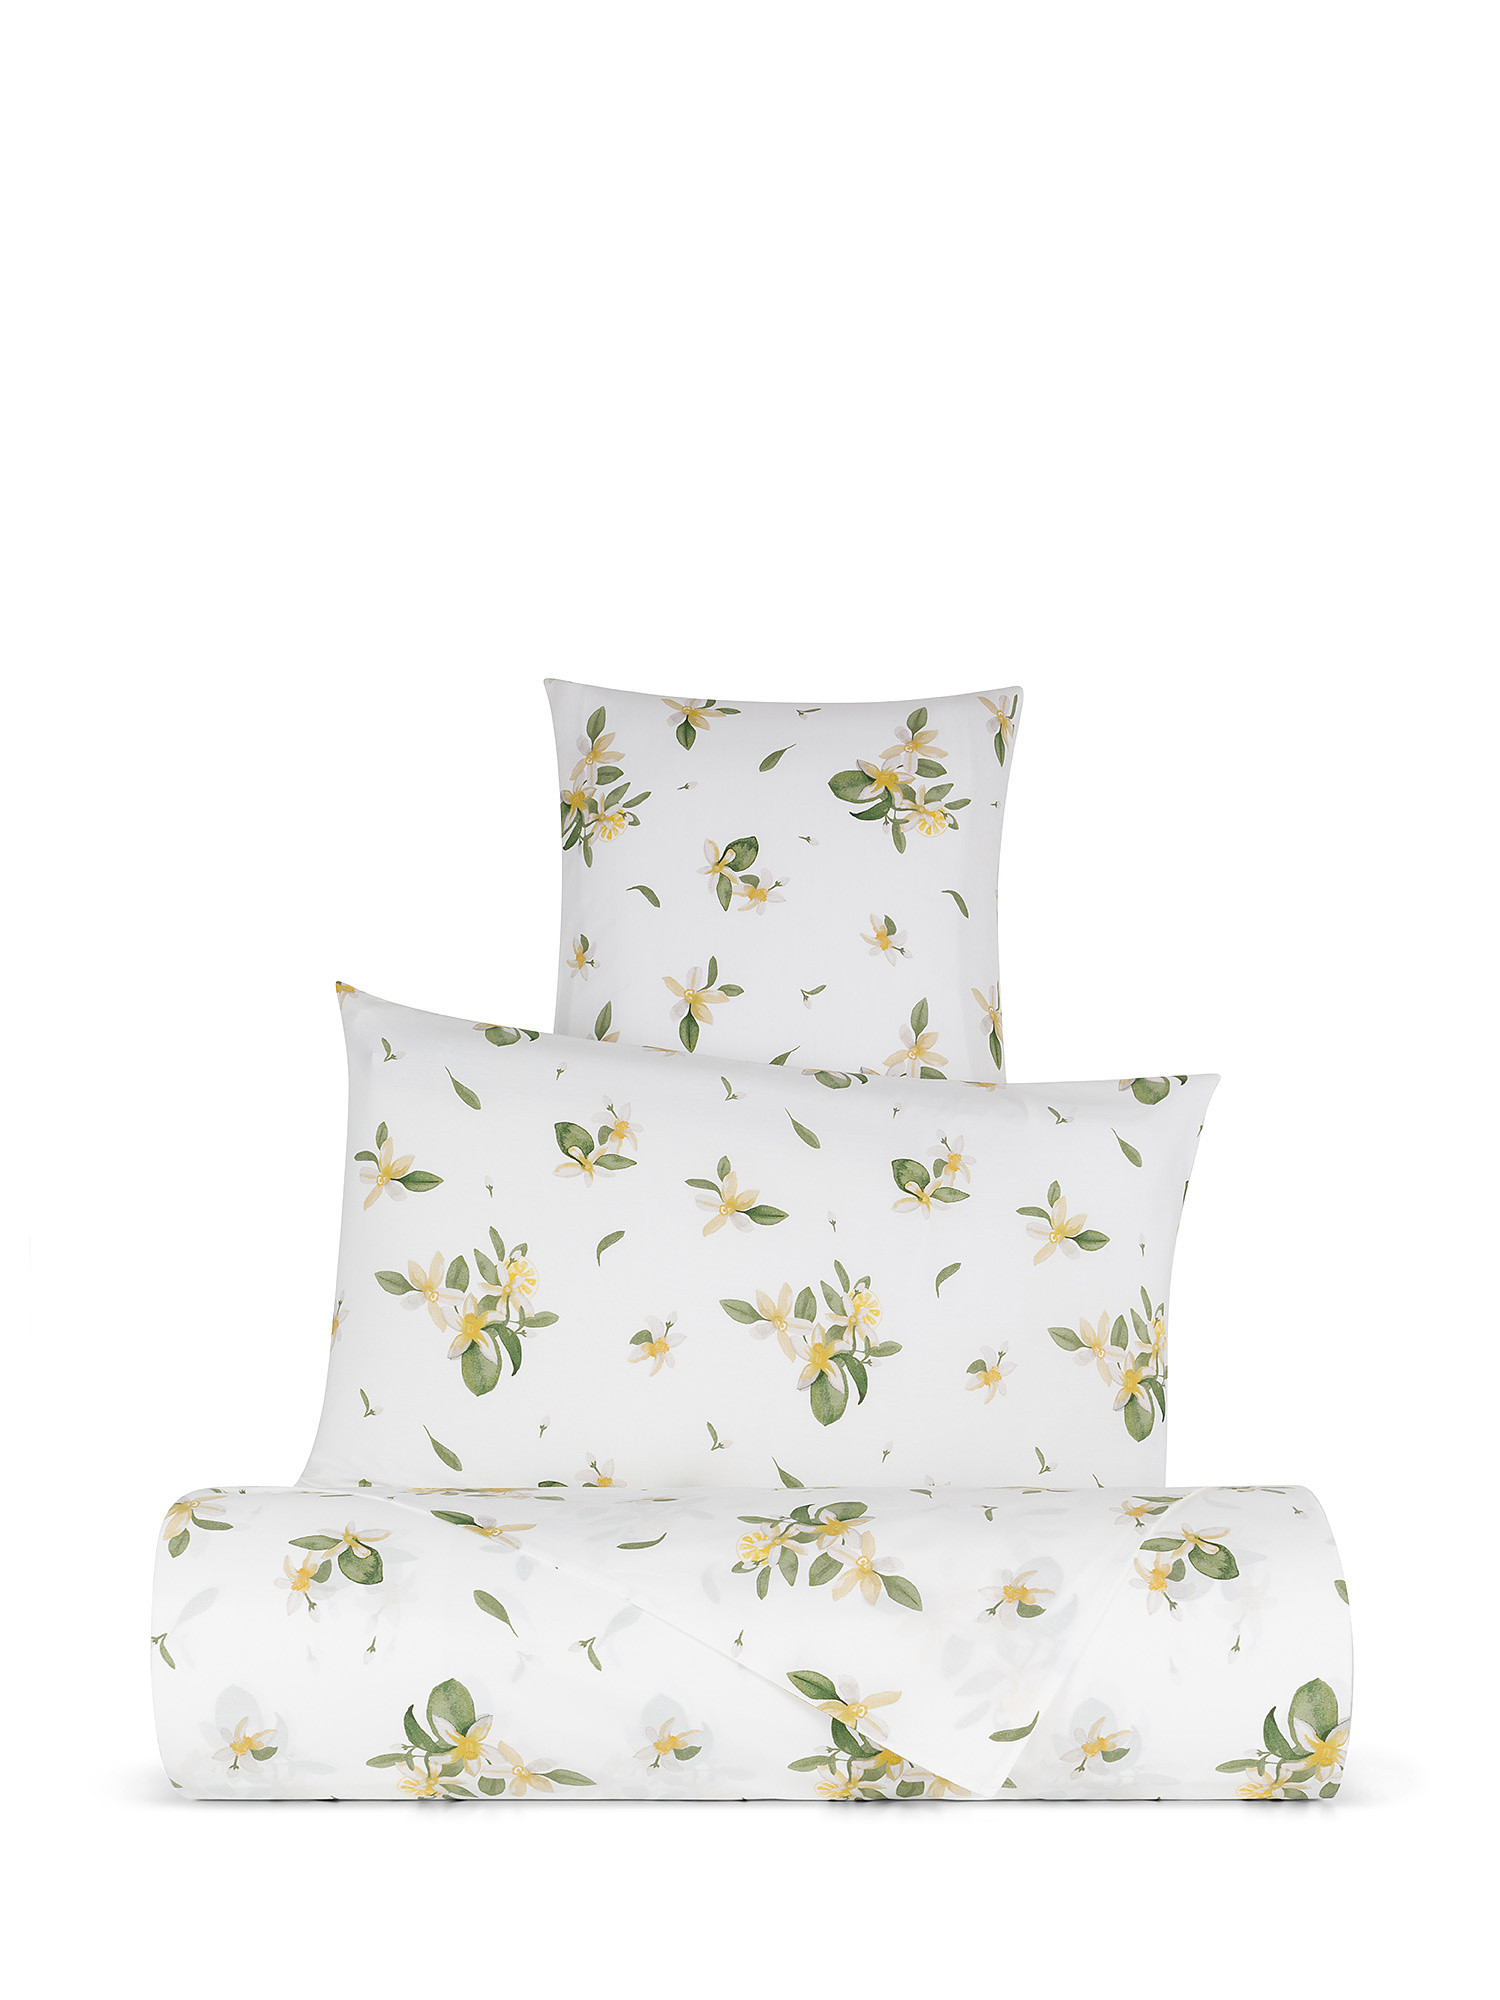 Floral patterned cotton percale duvet cover set, White, large image number 0